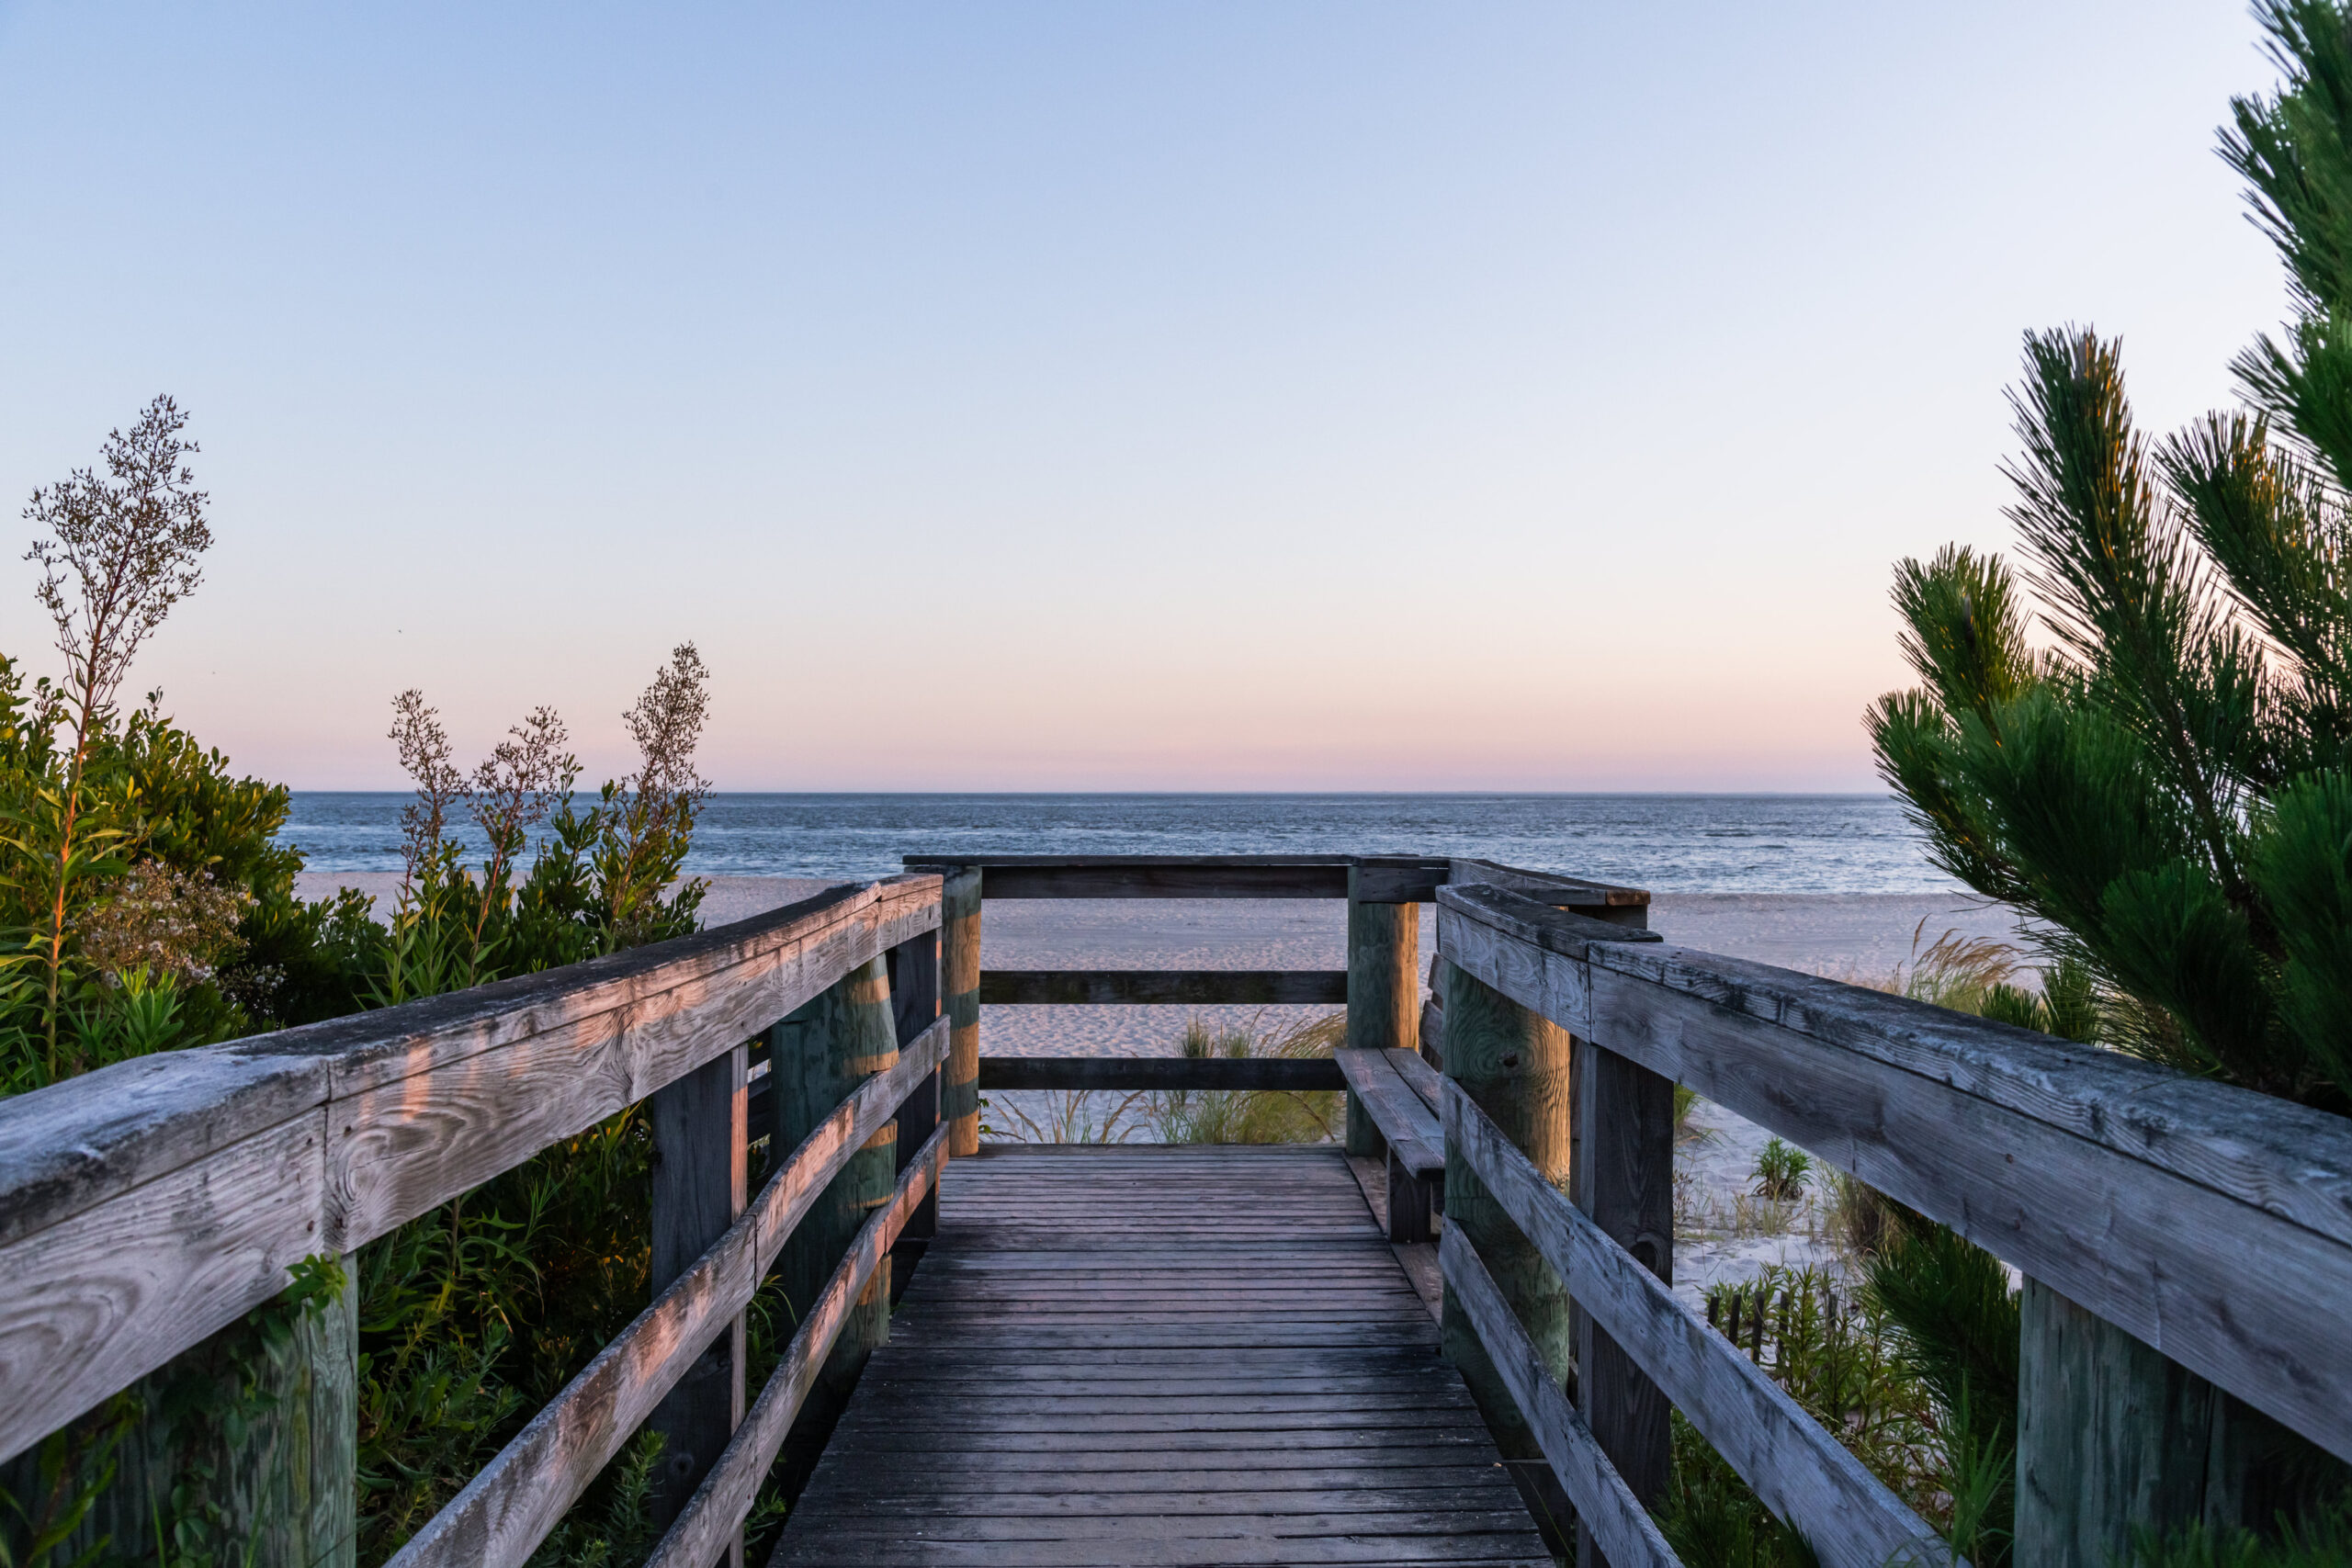 A wooden path to the beach at sunset with a clear blue and pink sky